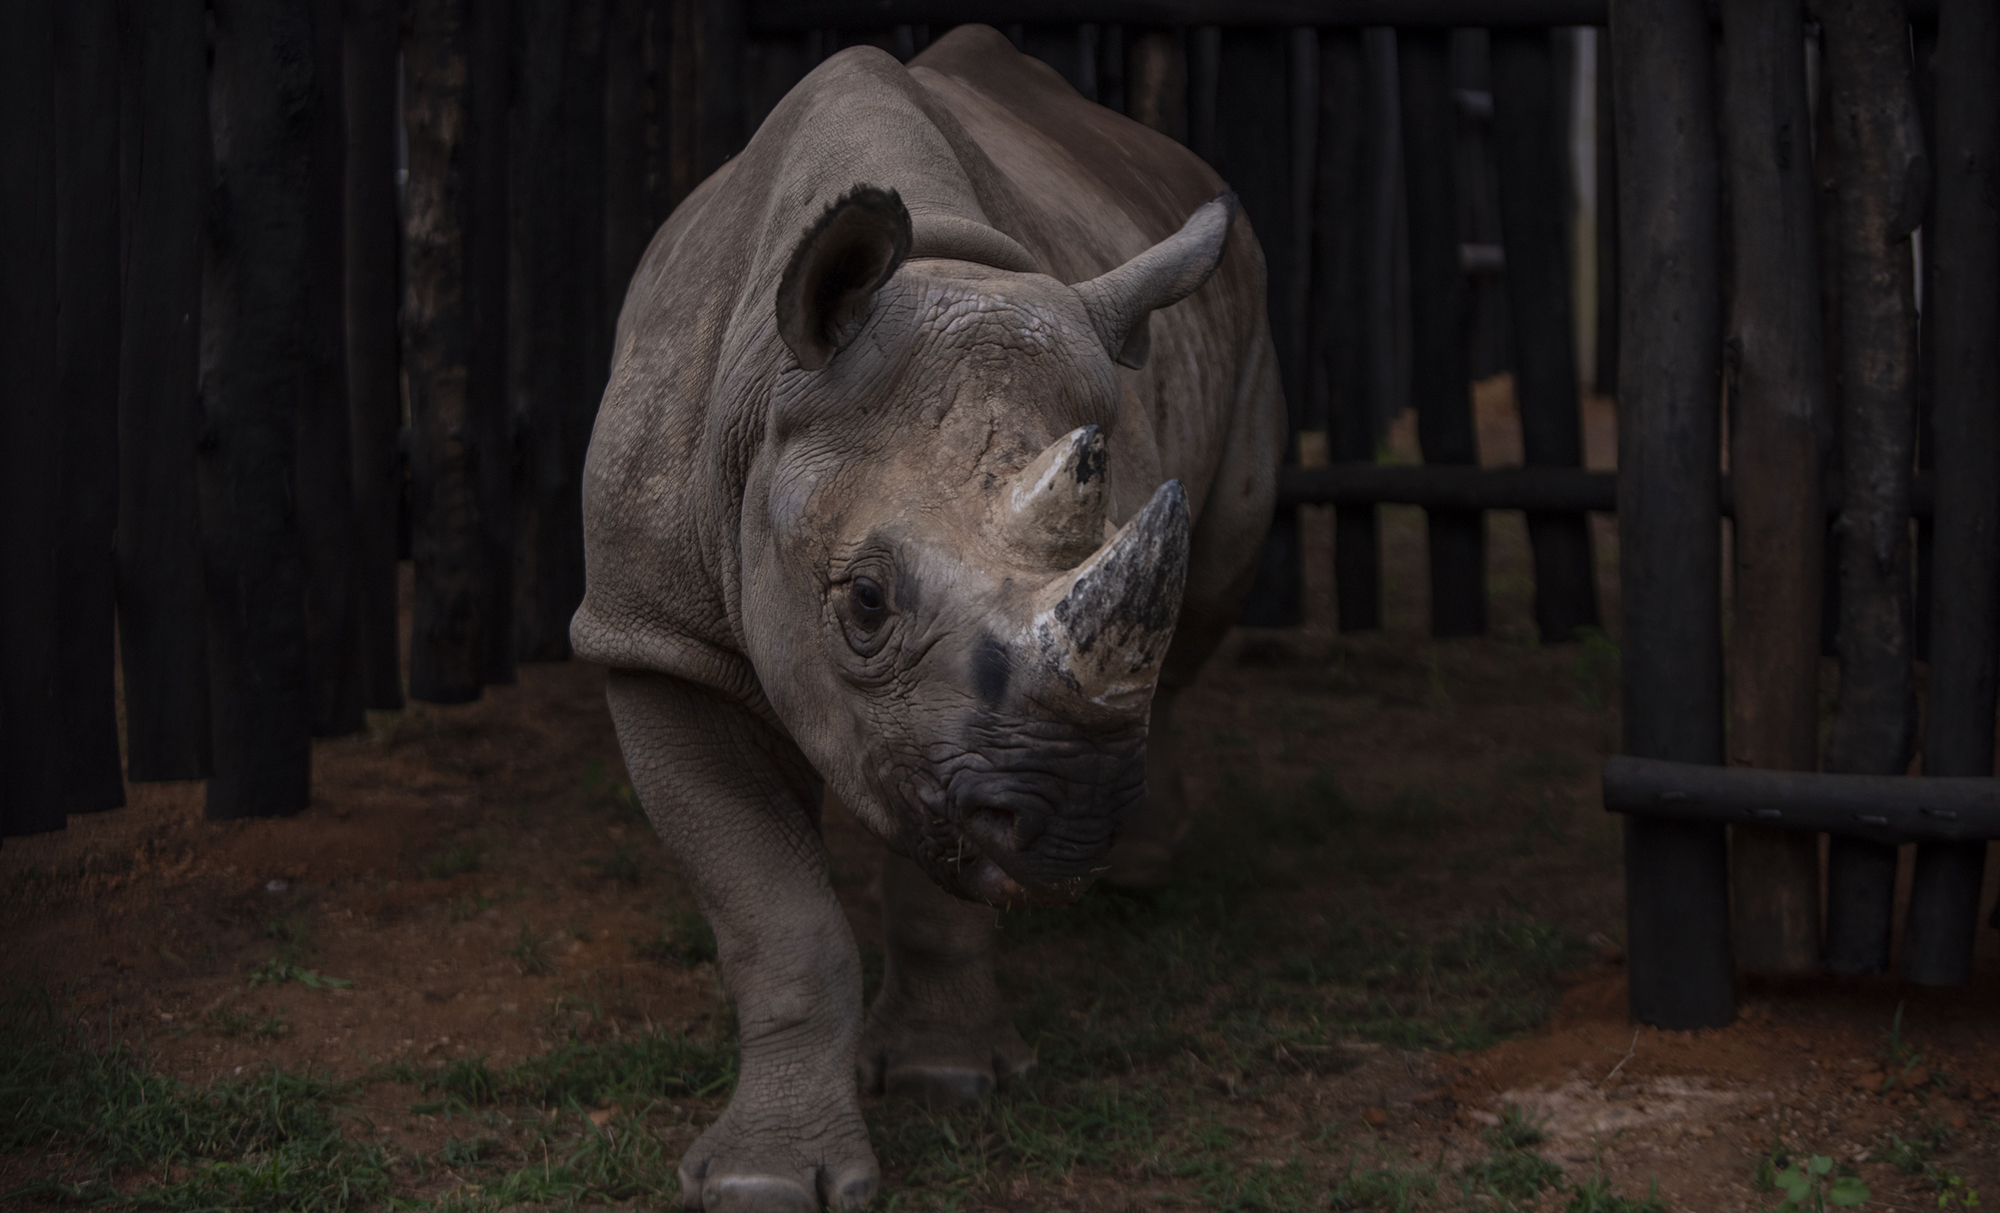 Rwandas rhinos are safer than its dissidents Rwandas rhinos safer than its dissidents, highlighting the misplaced priorities of wildlife groups image